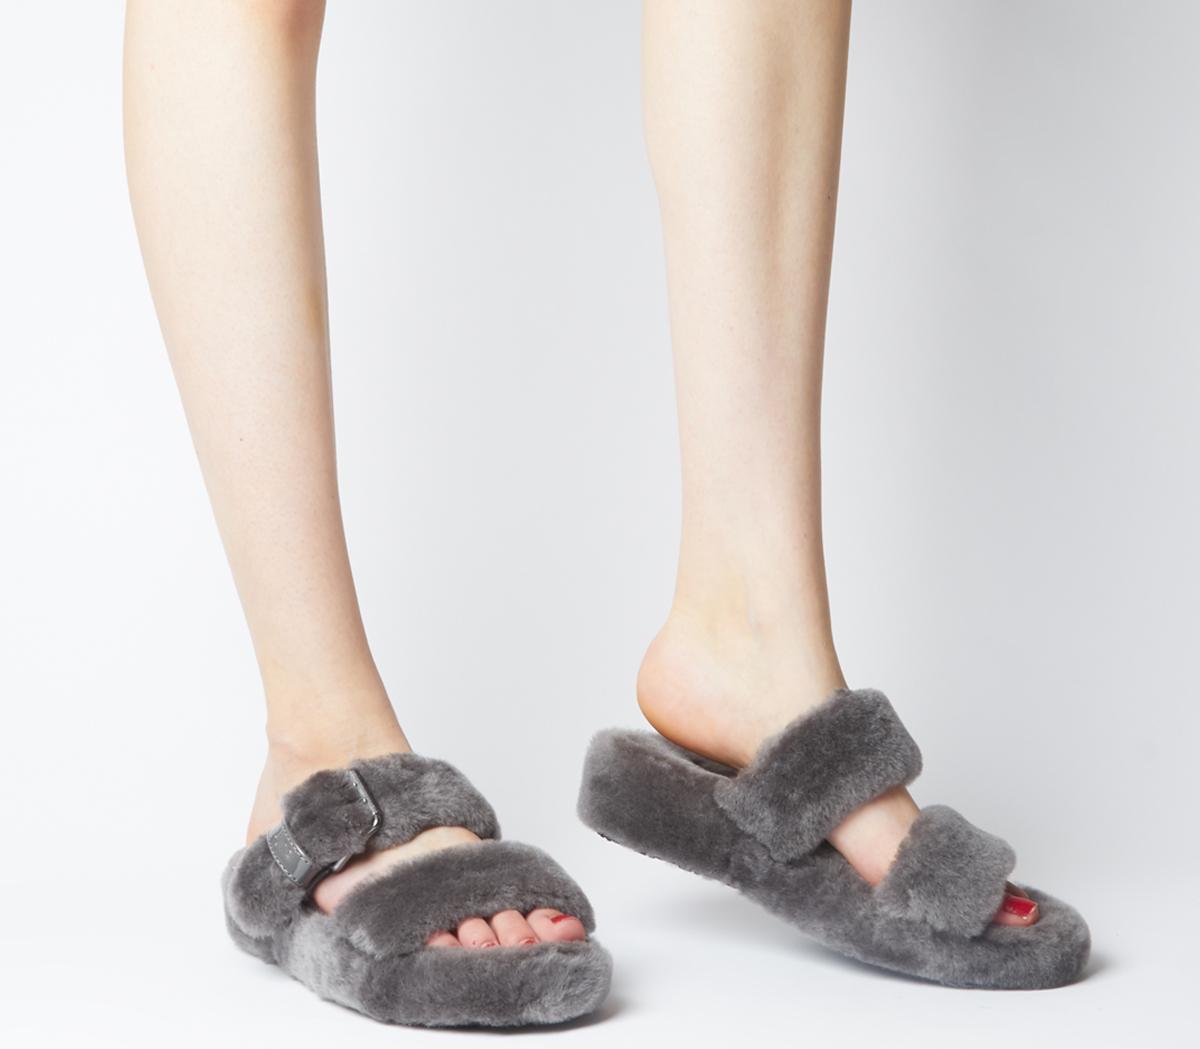 the new ugg sandals